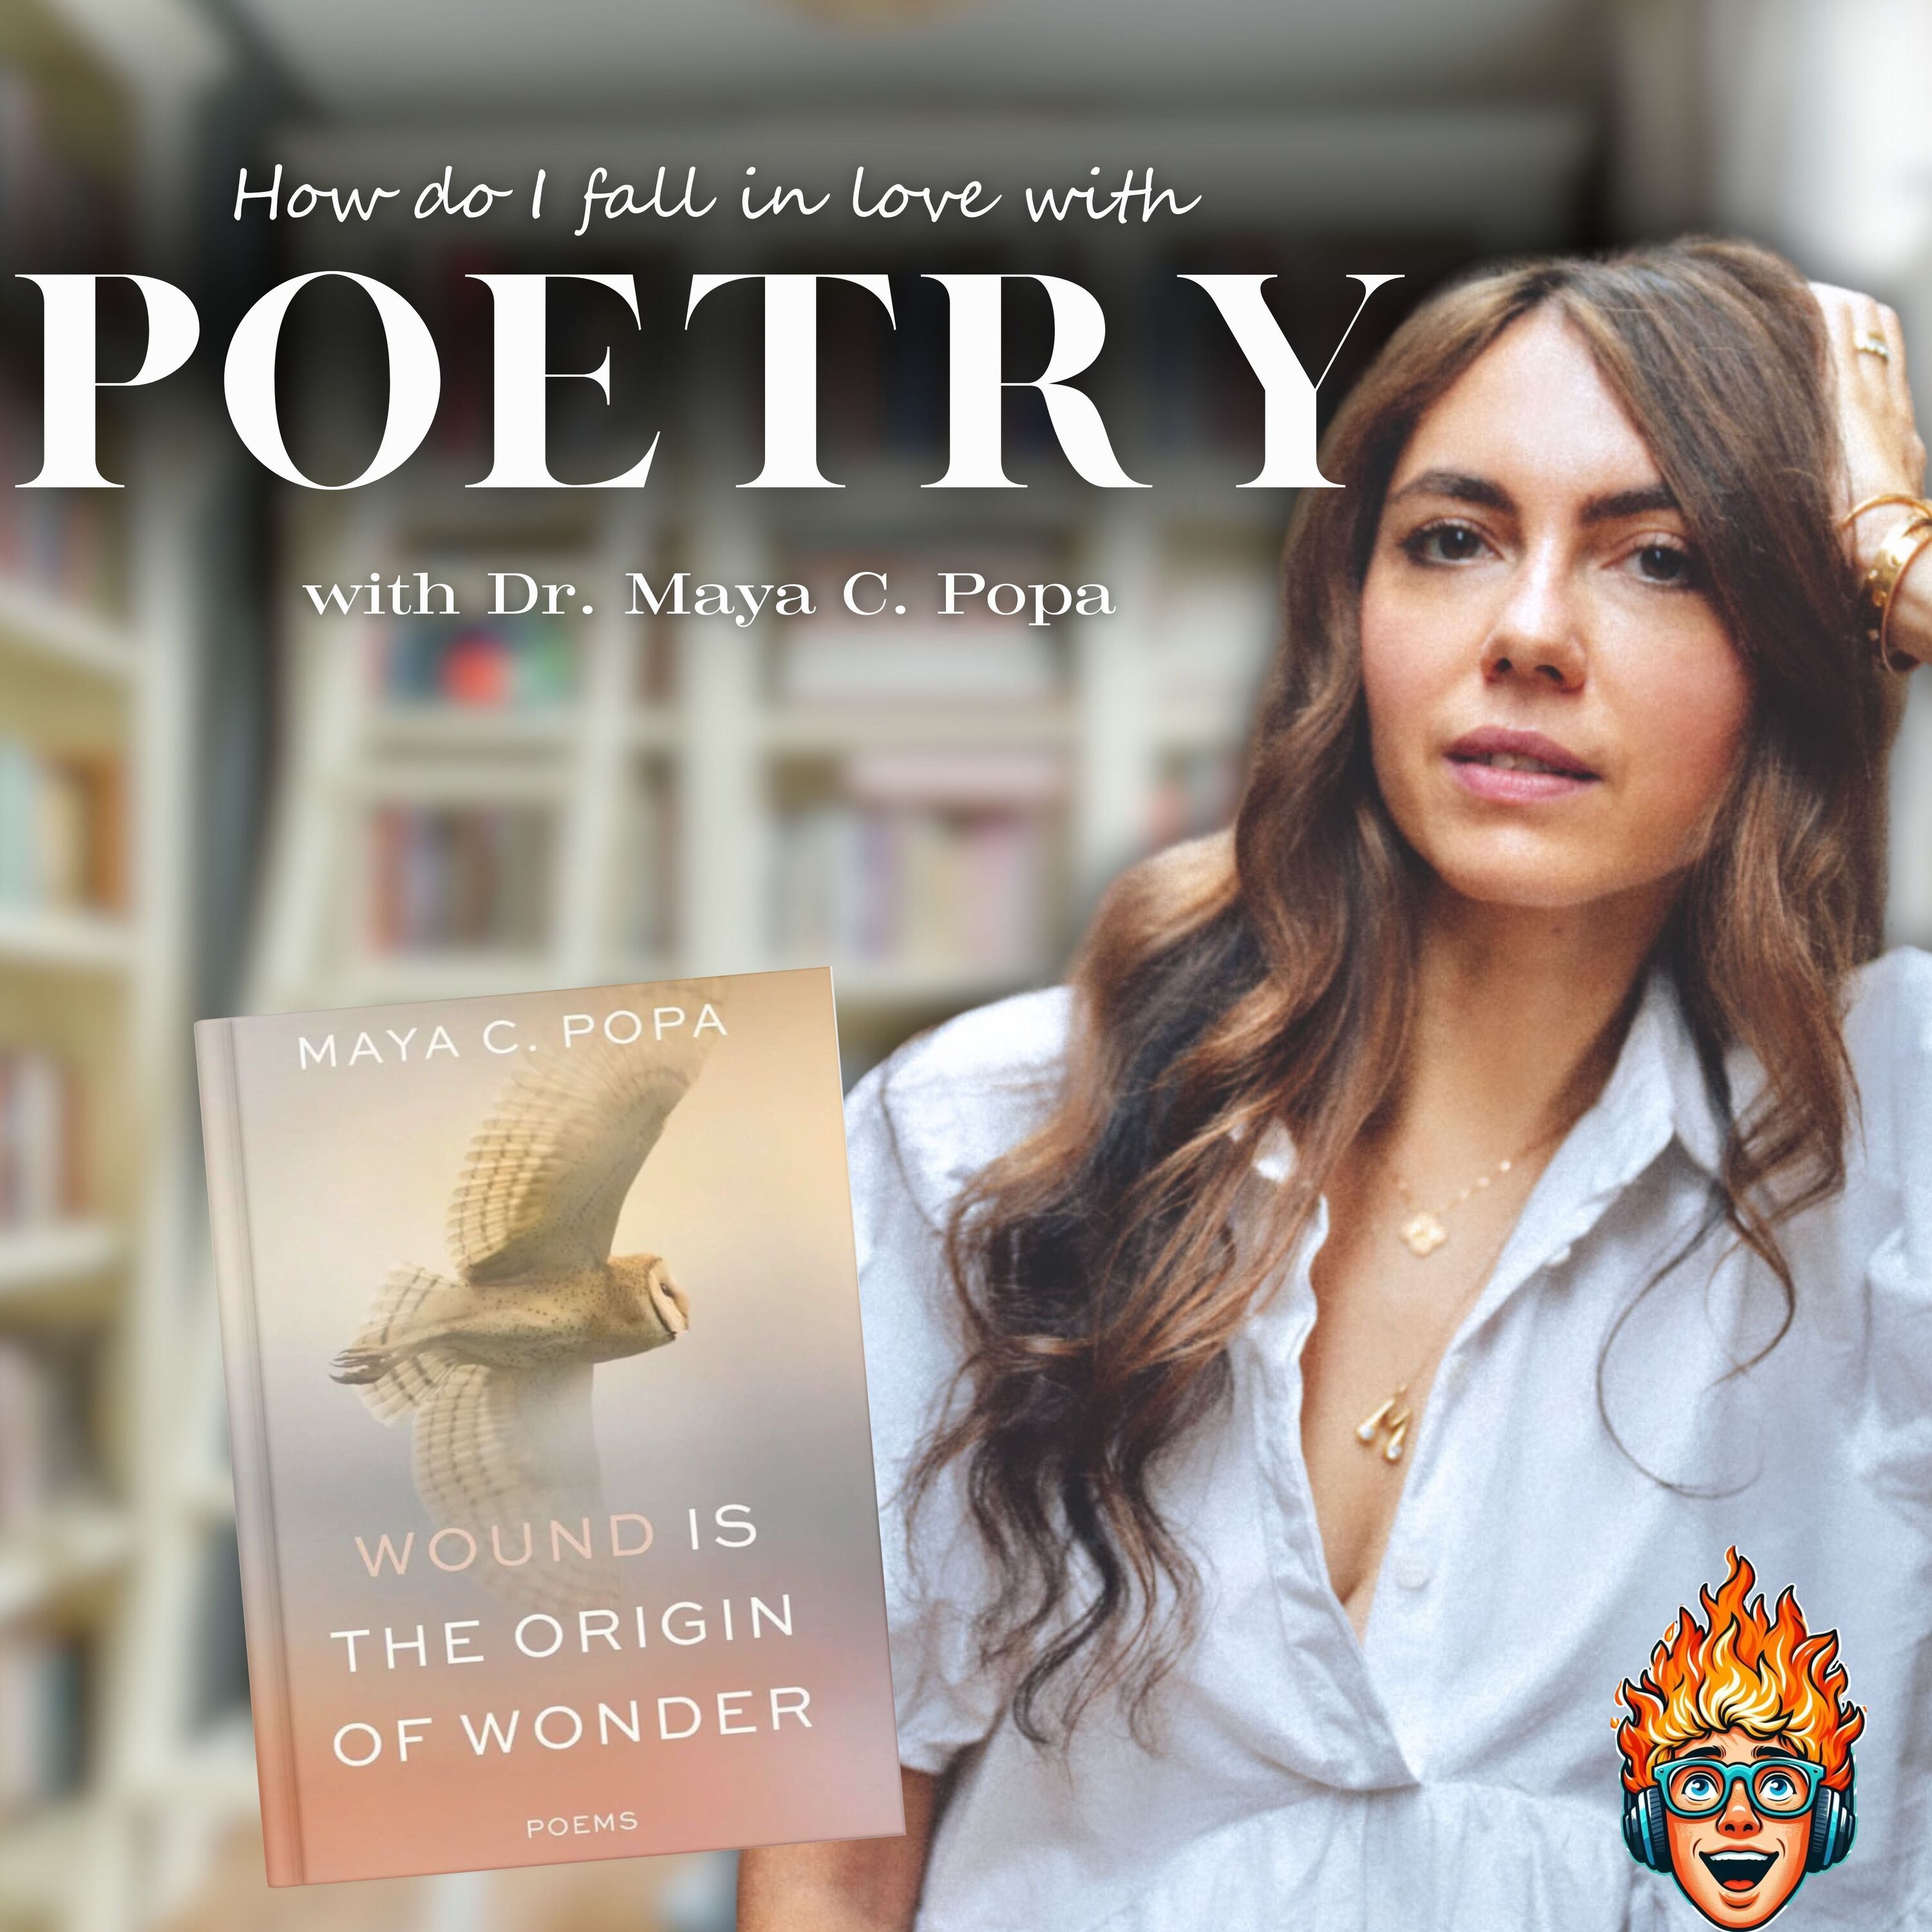 How do you fall in love with poetry? with Dr. Maya C. Popa